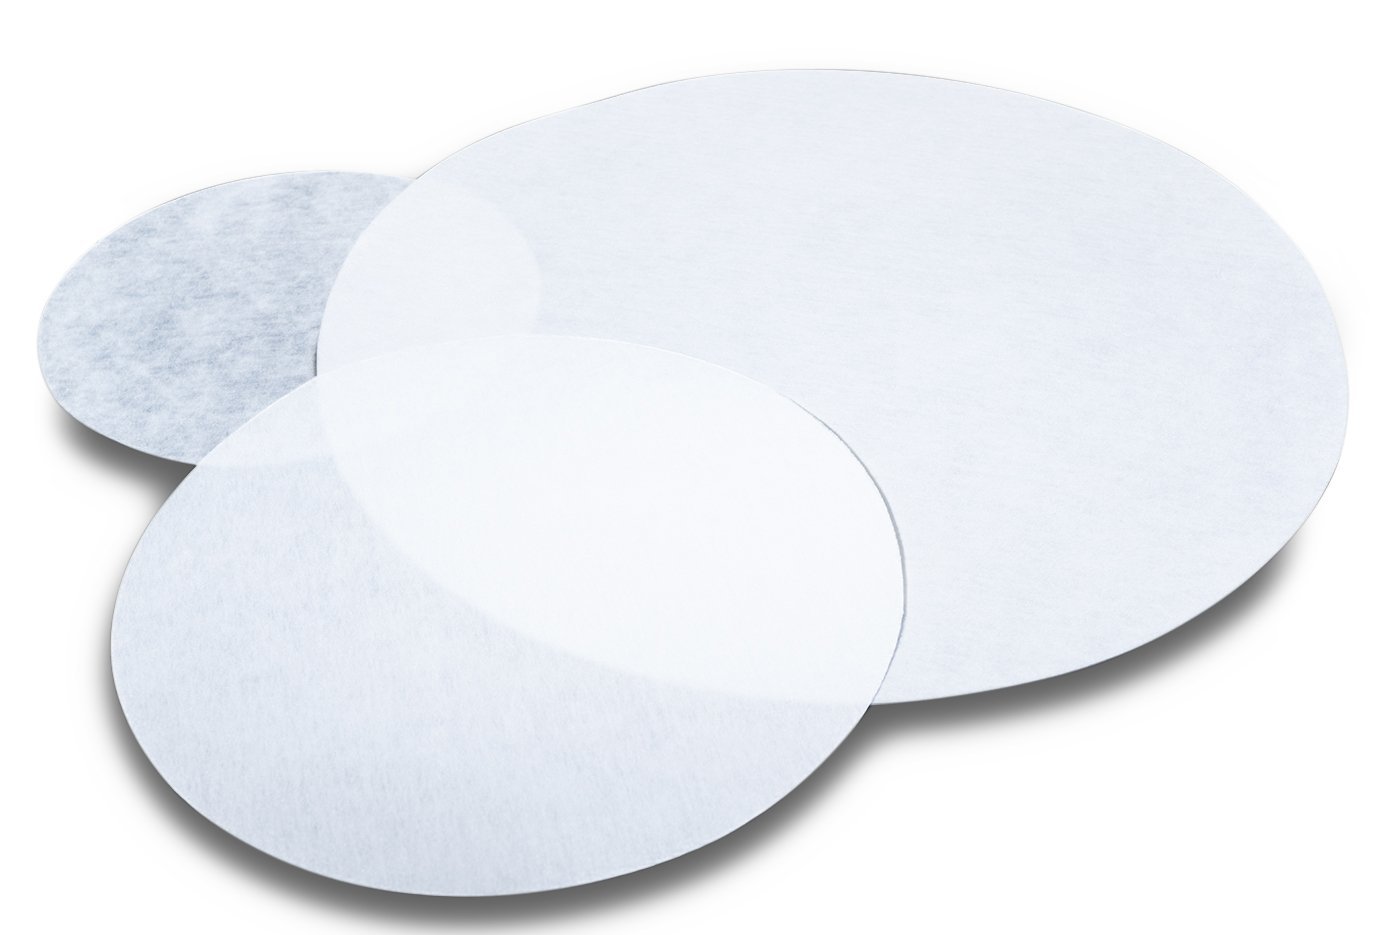 Cellulose Filter Paper 100 Micron - 5 Pack Shop All Categories BVV 6-inch